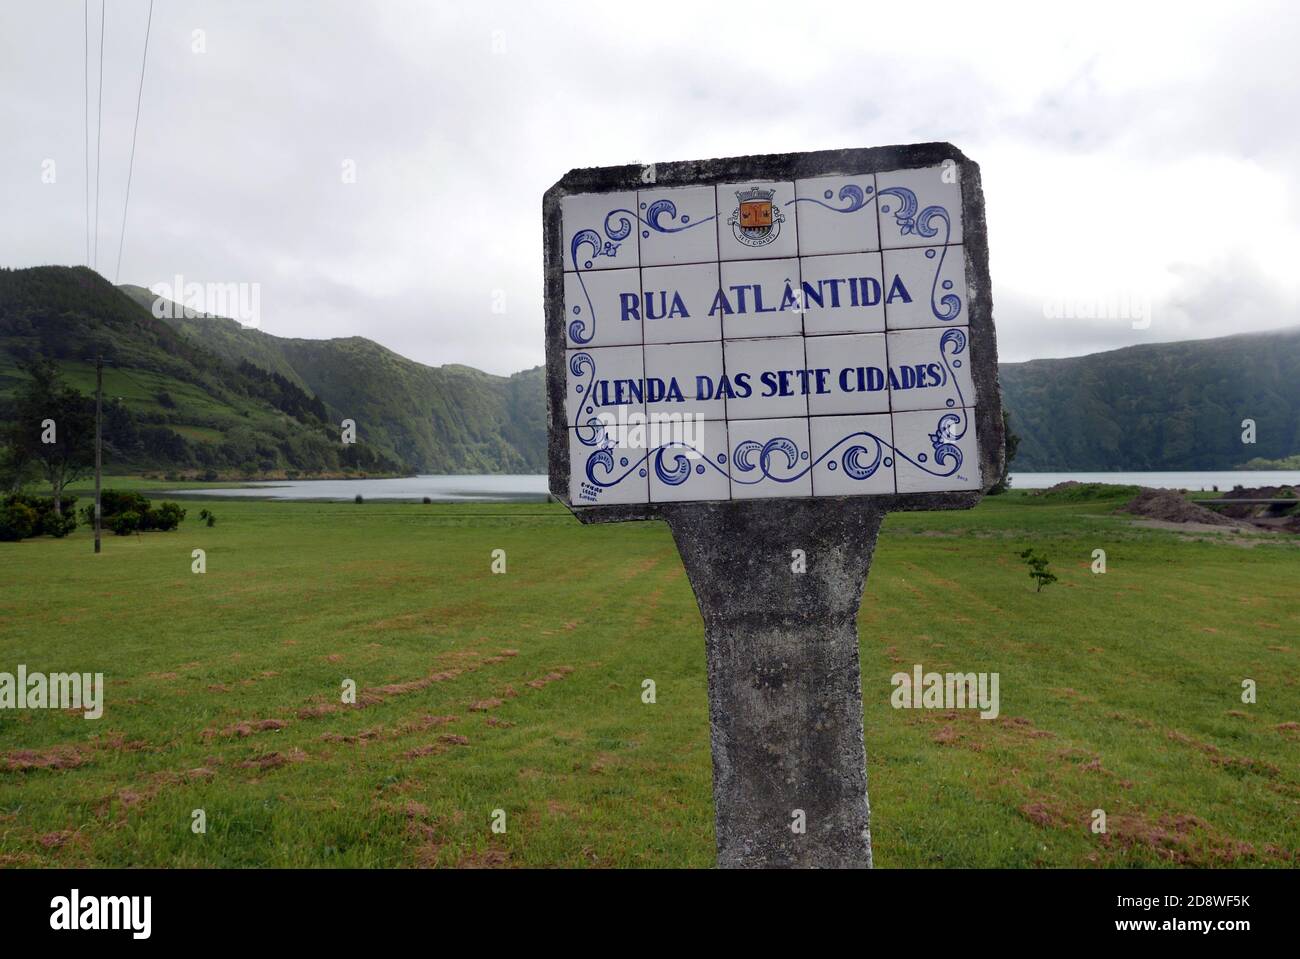 A concrete and ceramic street sign in the caldera village of Sete Cidades on the island of Säo Miguel in the Azores refers to the legend of Atlantis. Stock Photo